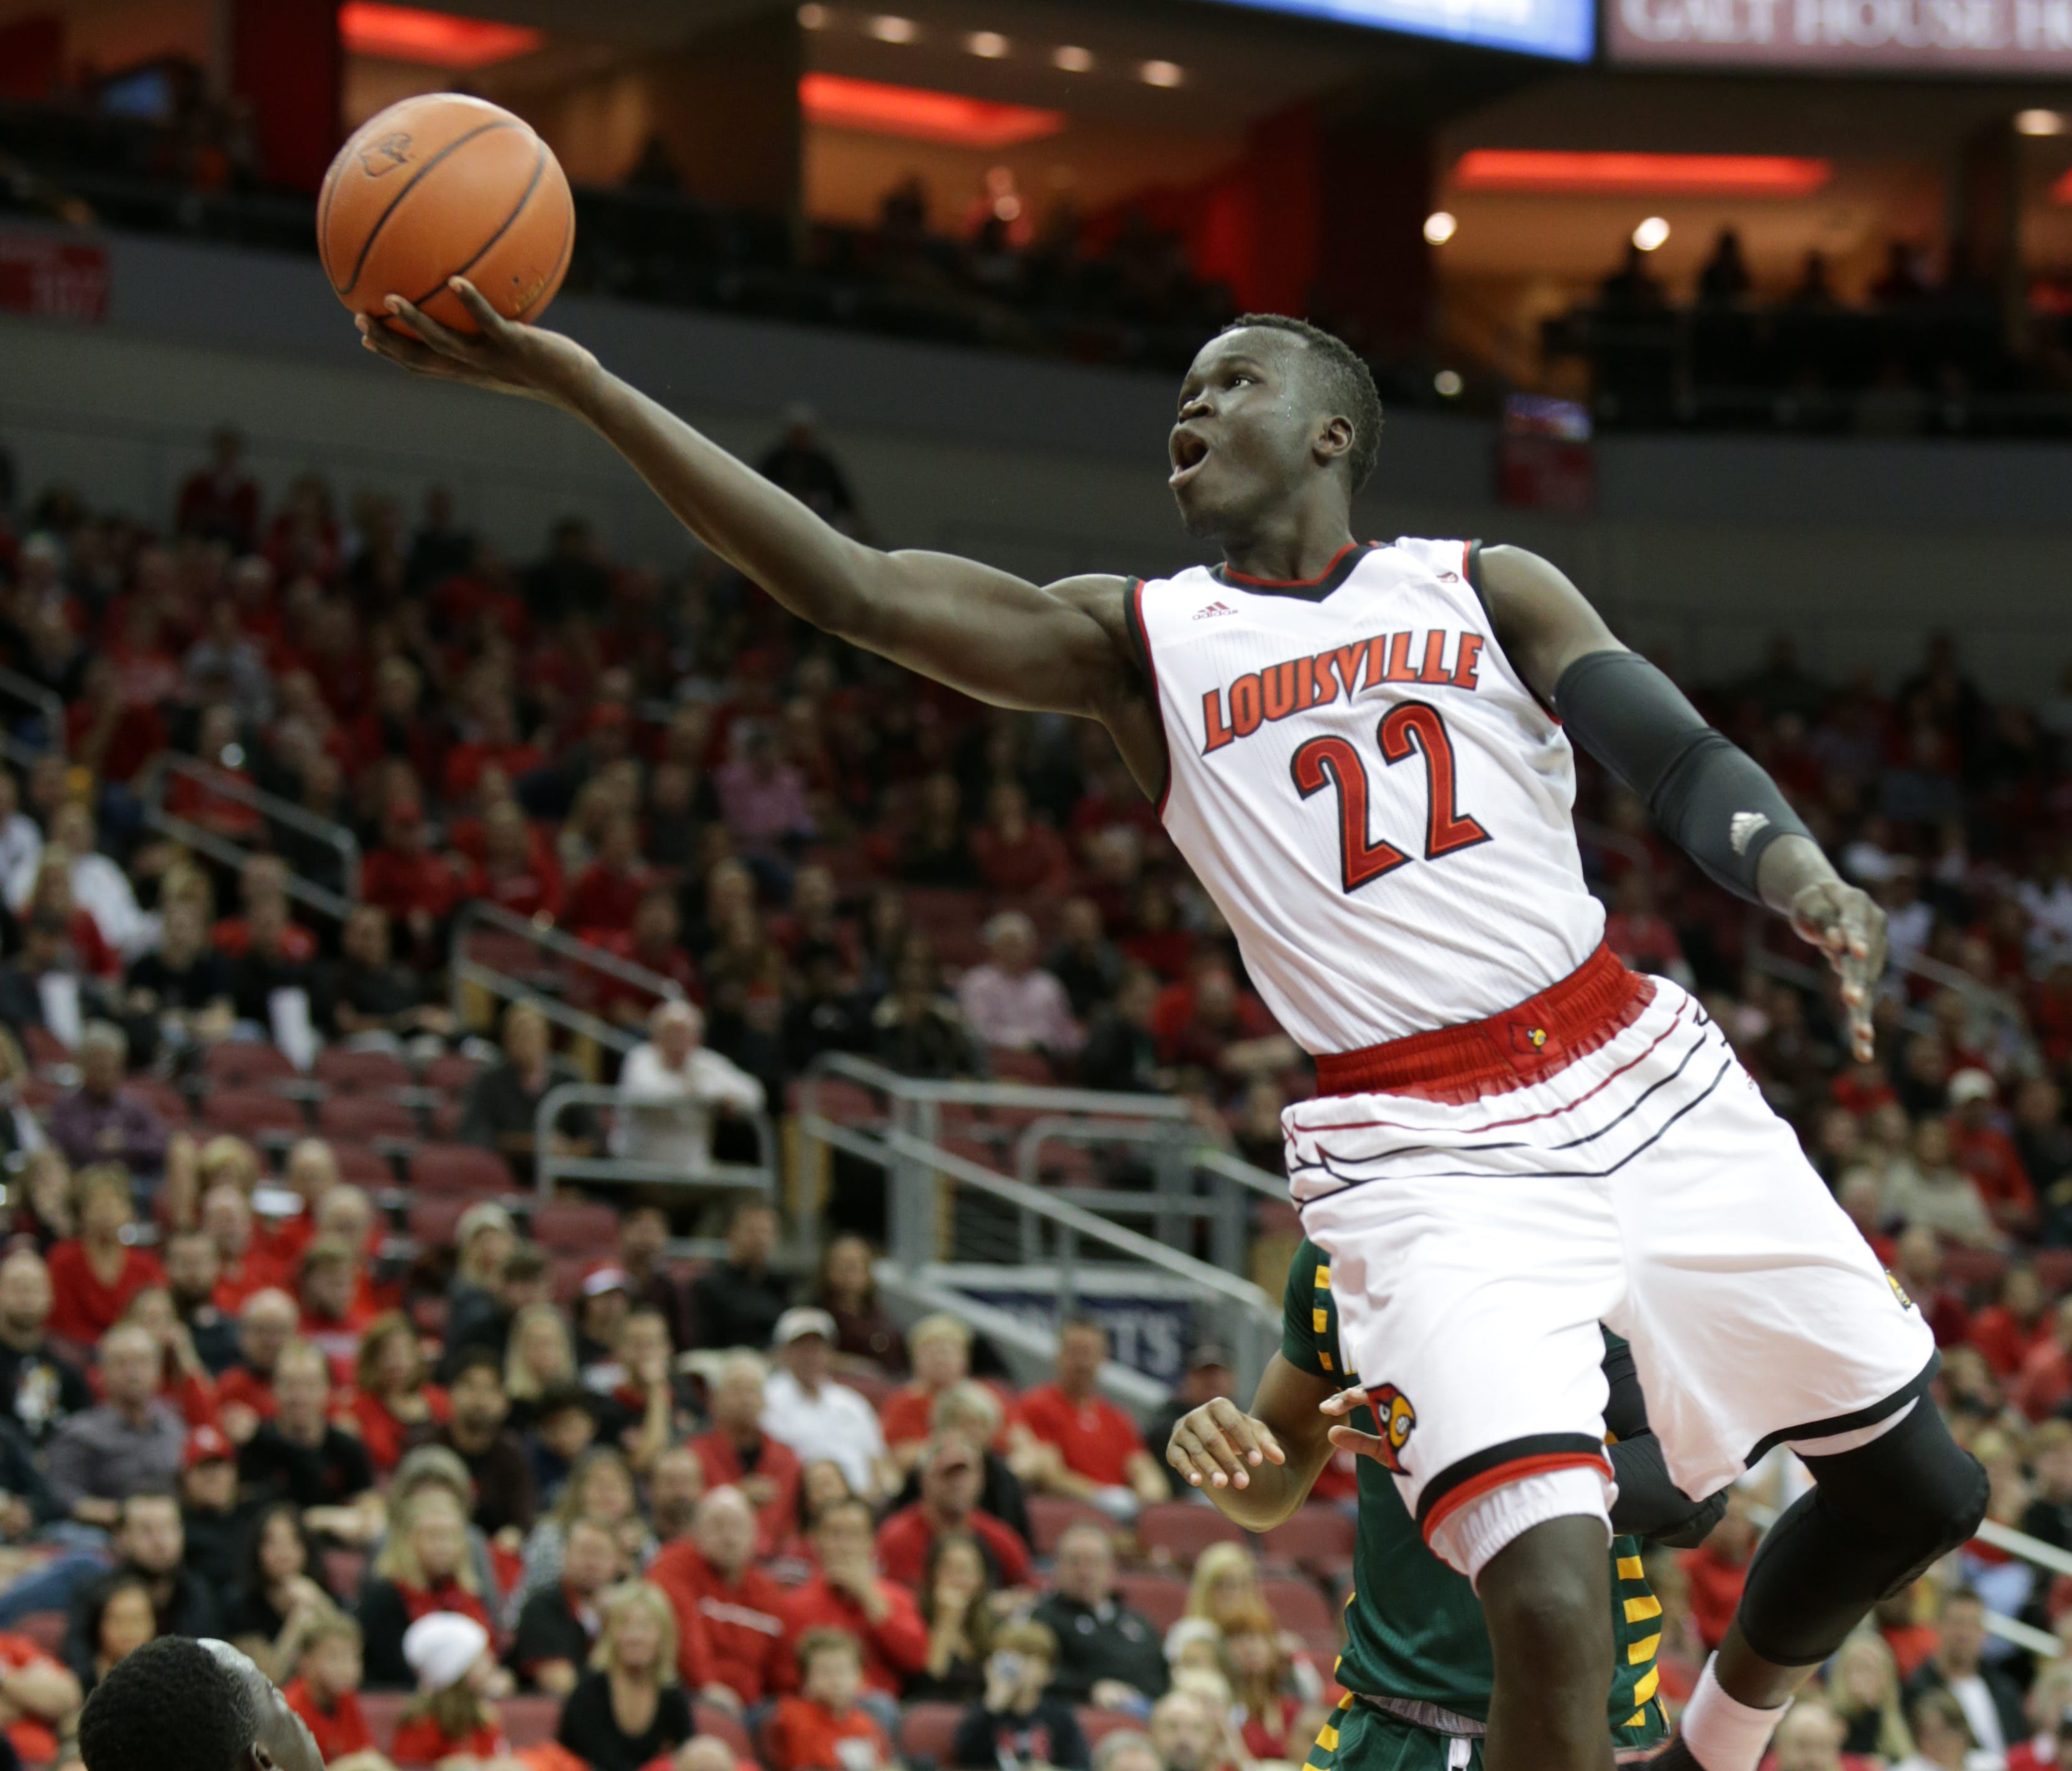 Louisville's Deng Adel rolls in two points during second half action against George Mason. Nov. 12, 2017.